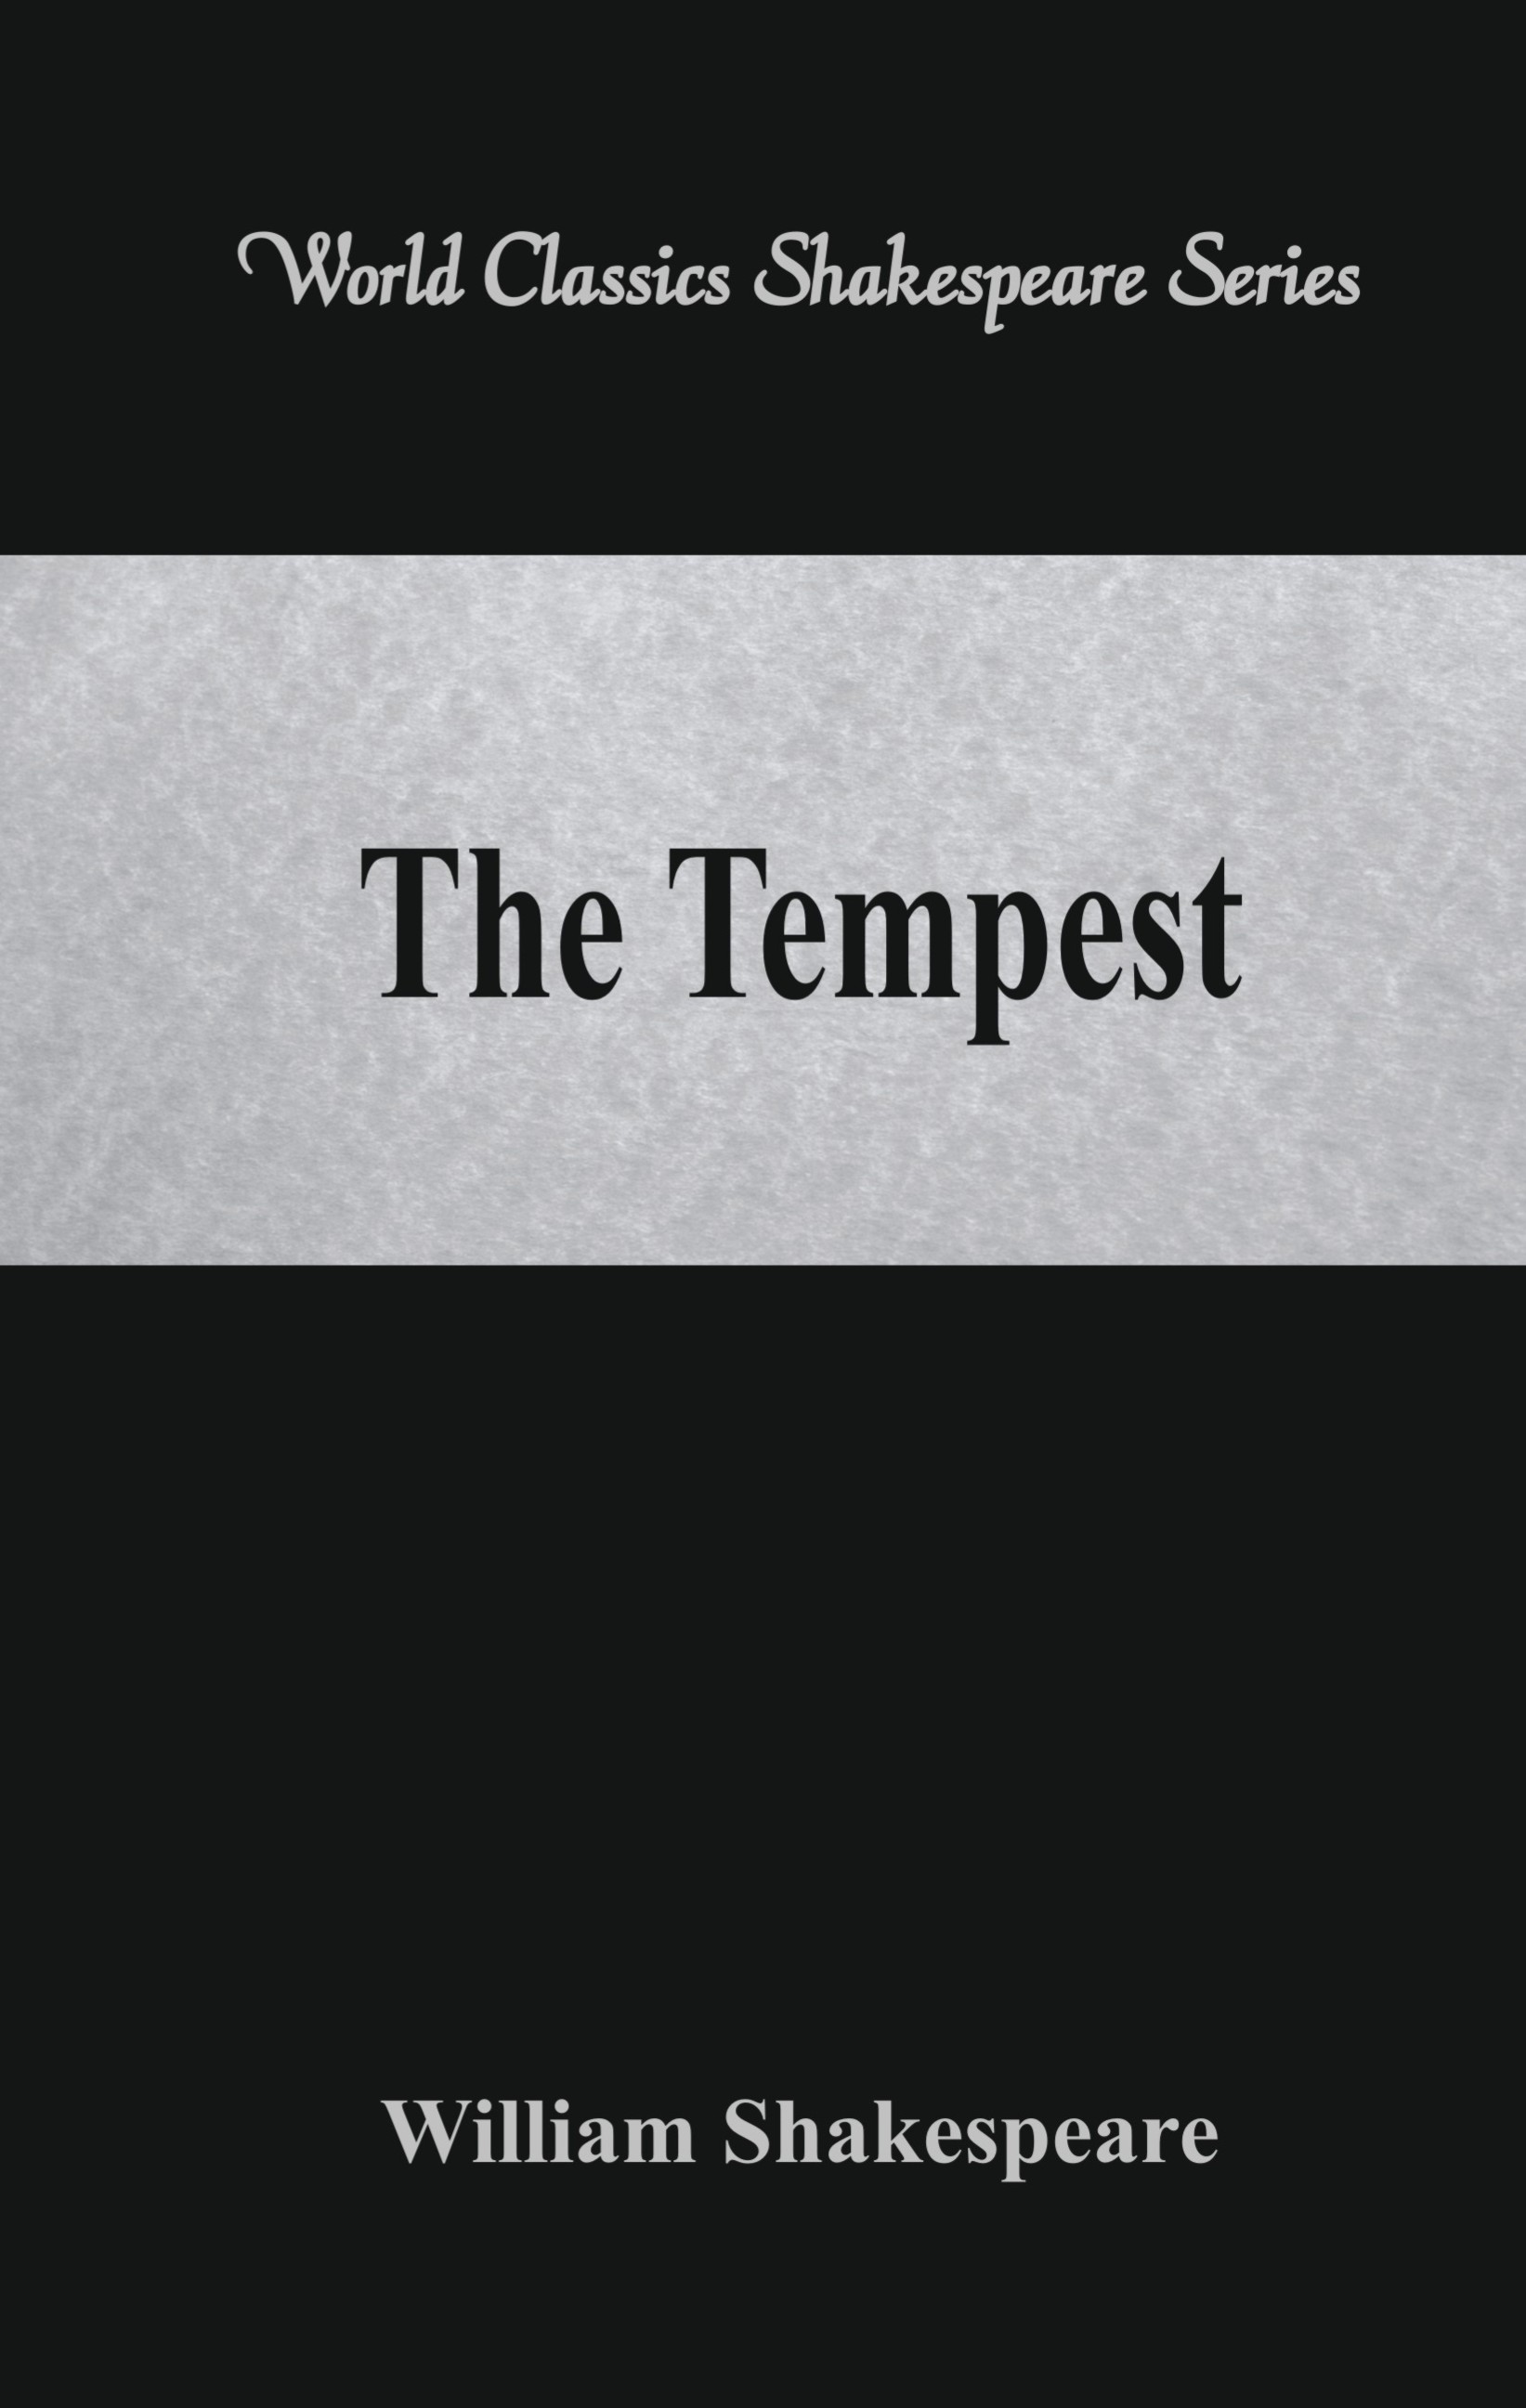 The Tempest  (World Classics Shakespeare Series)